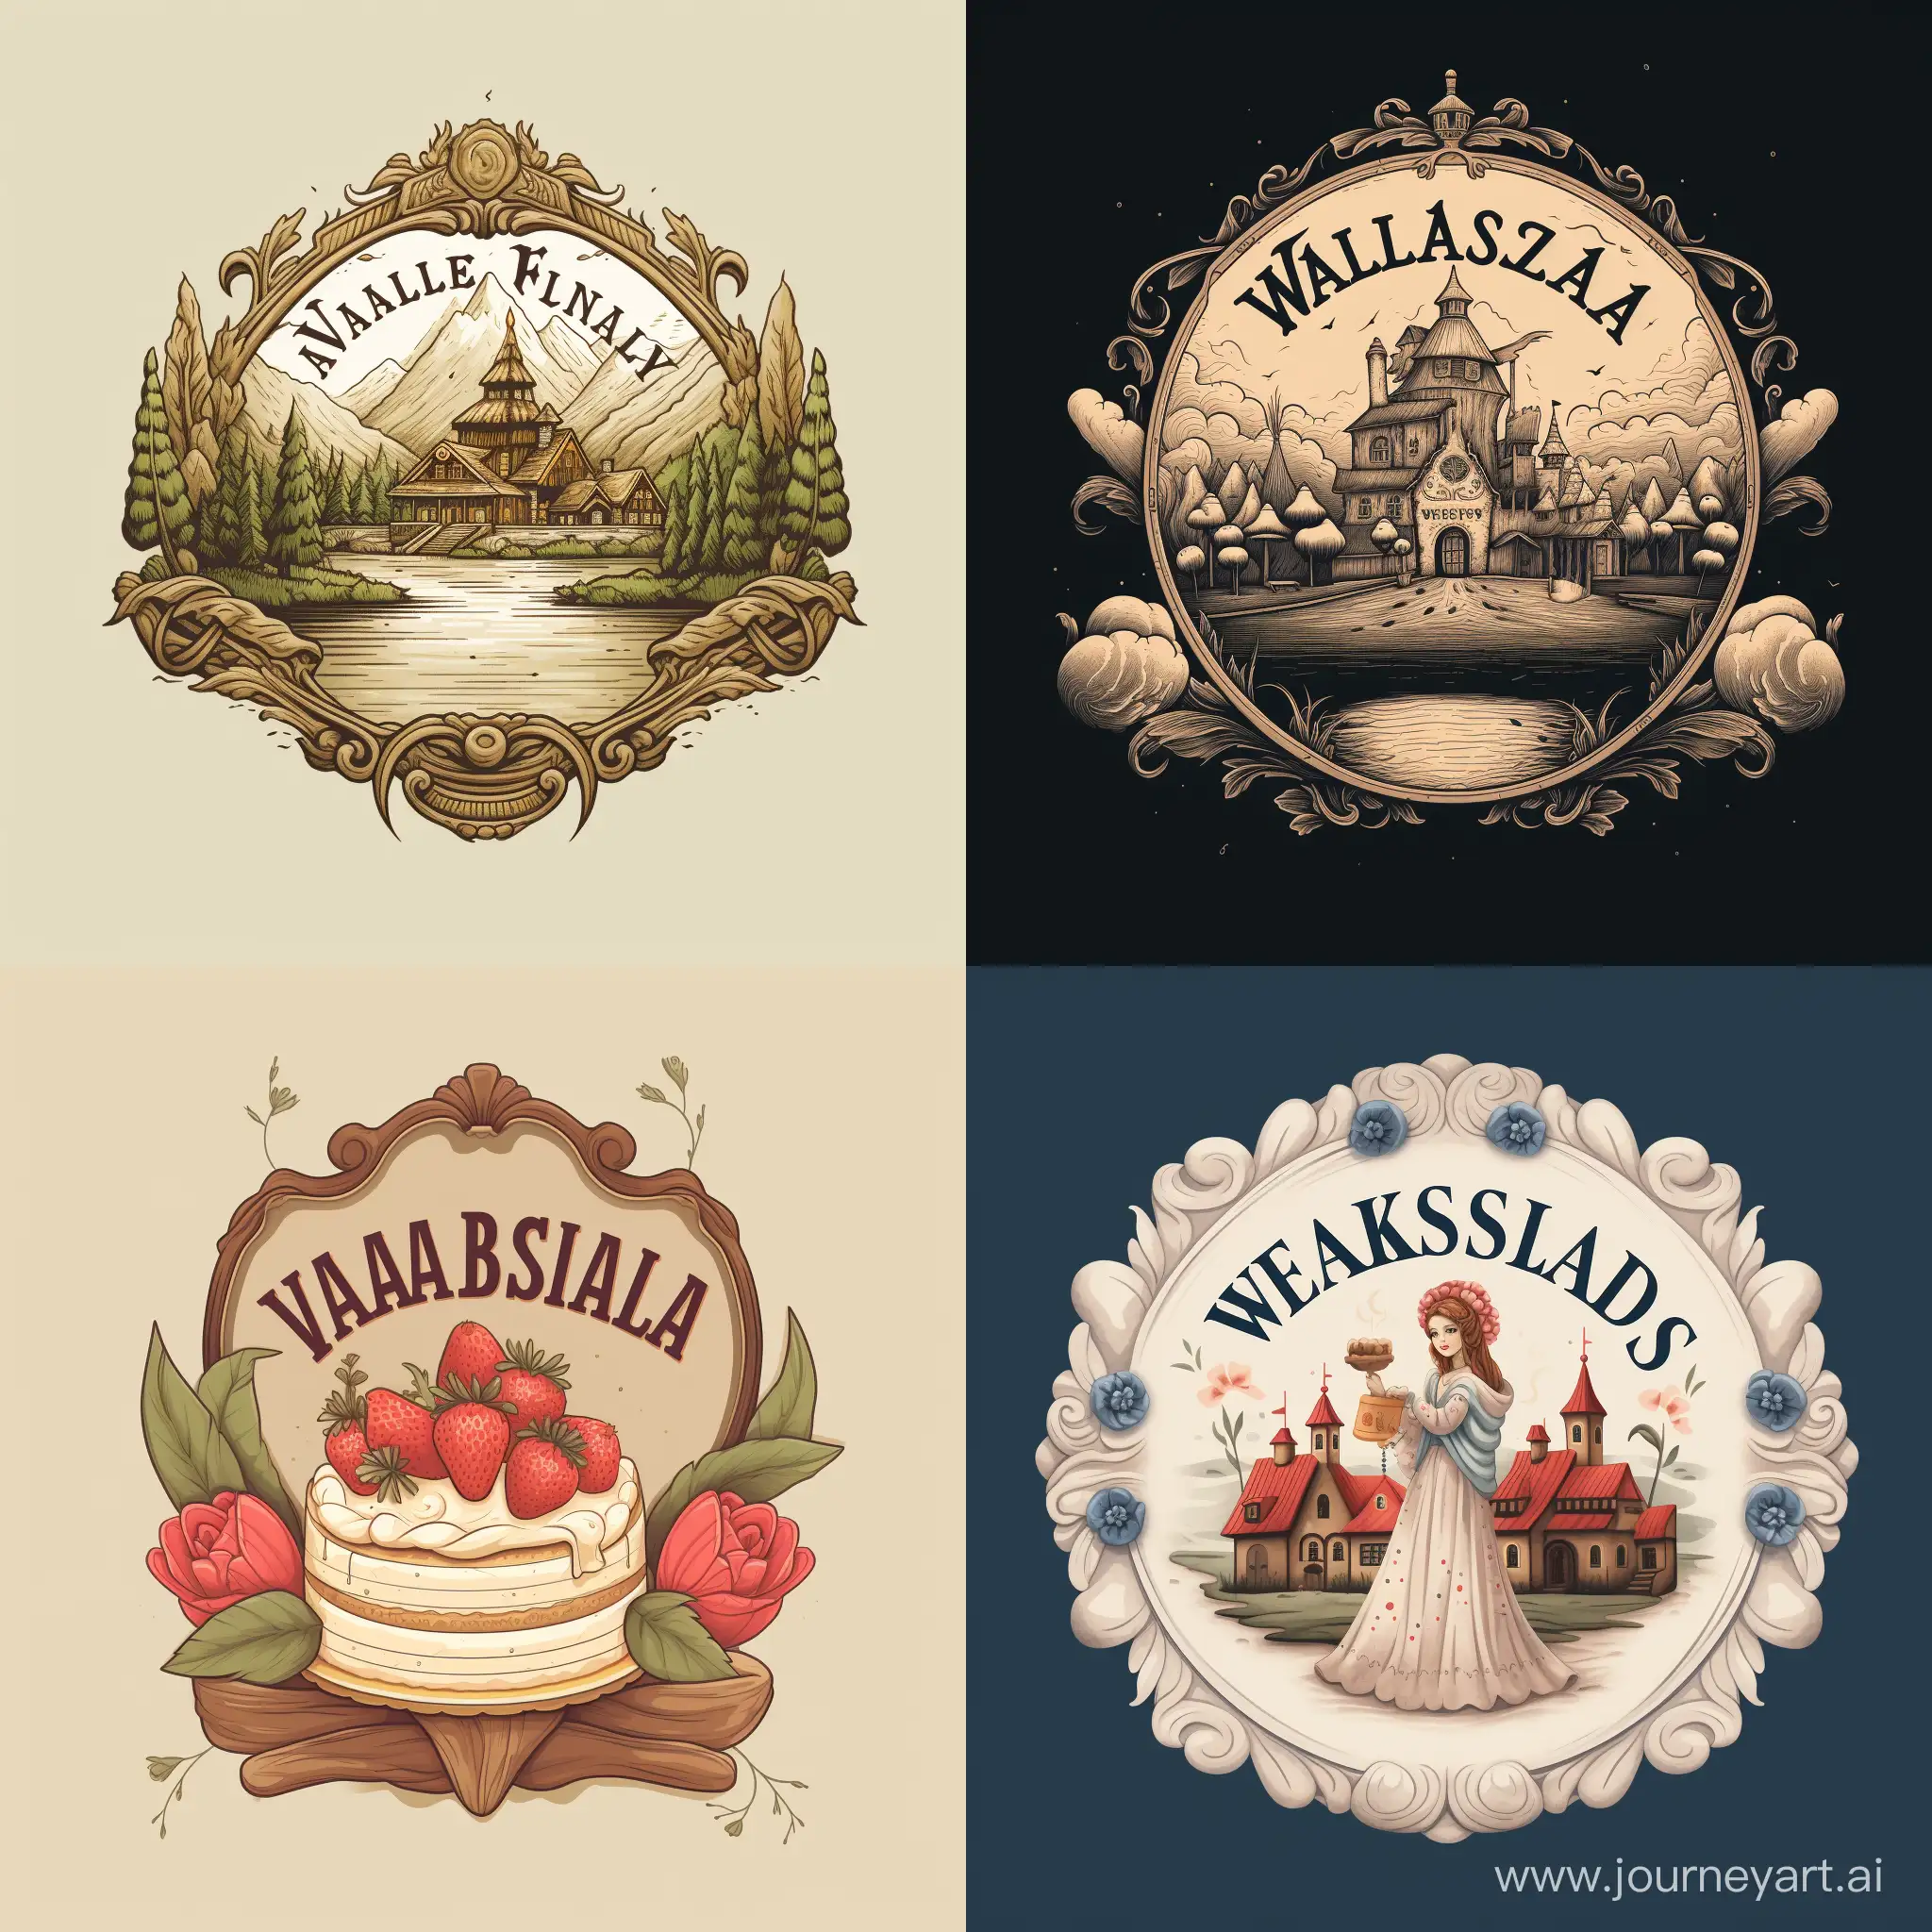 Vasilisas-Bakery-Emblem-with-Whimsical-Cake-and-Pastry-Delights